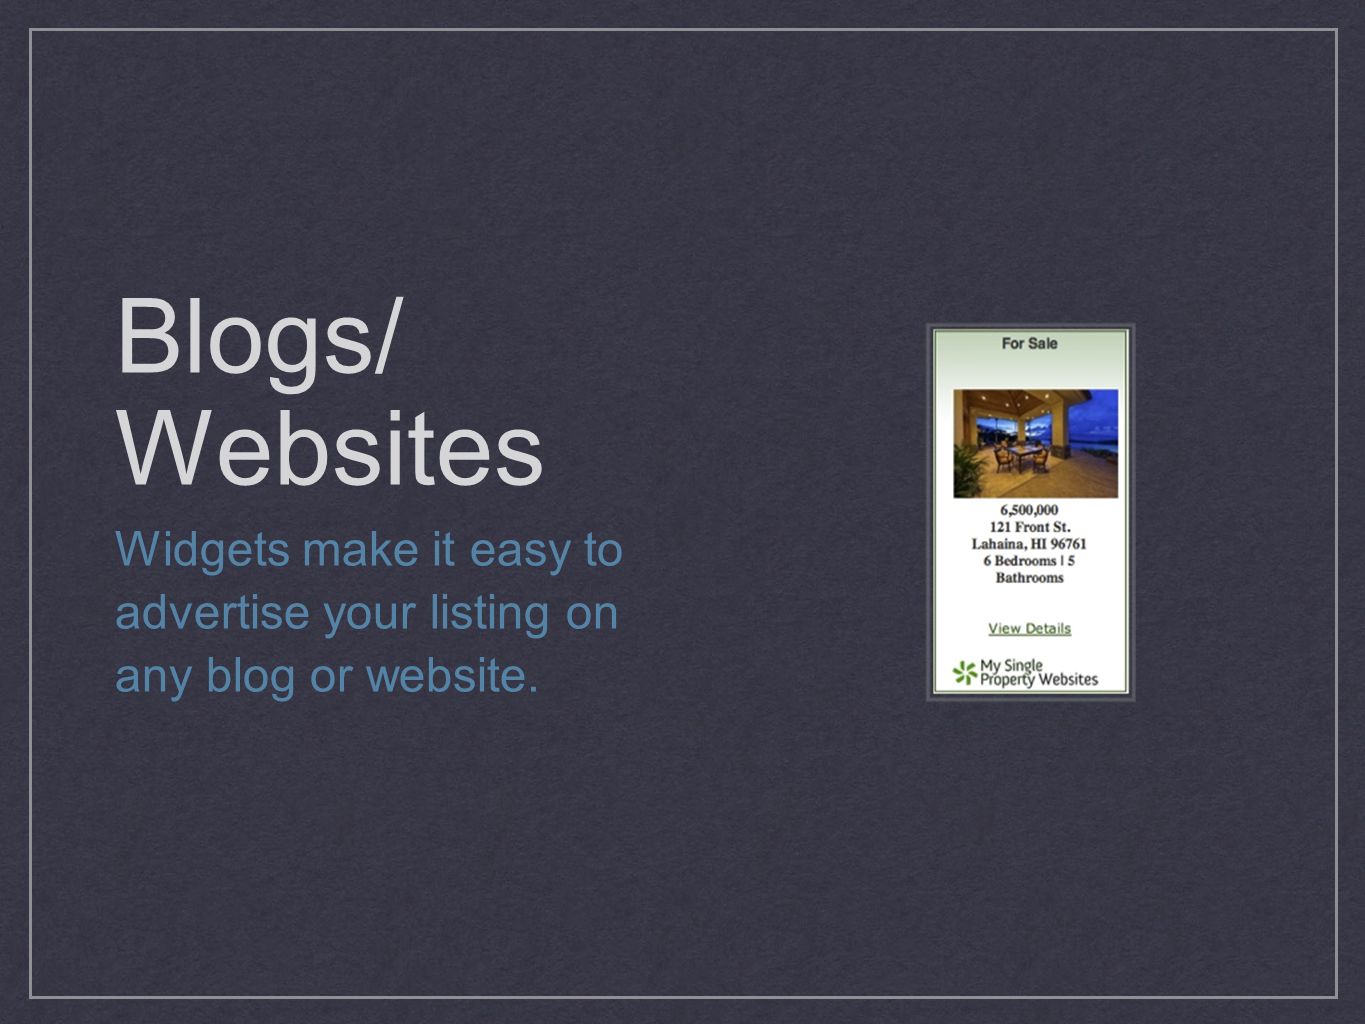 Blogs/ Websites Widgets make it easy to advertise your listing on any blog or website.